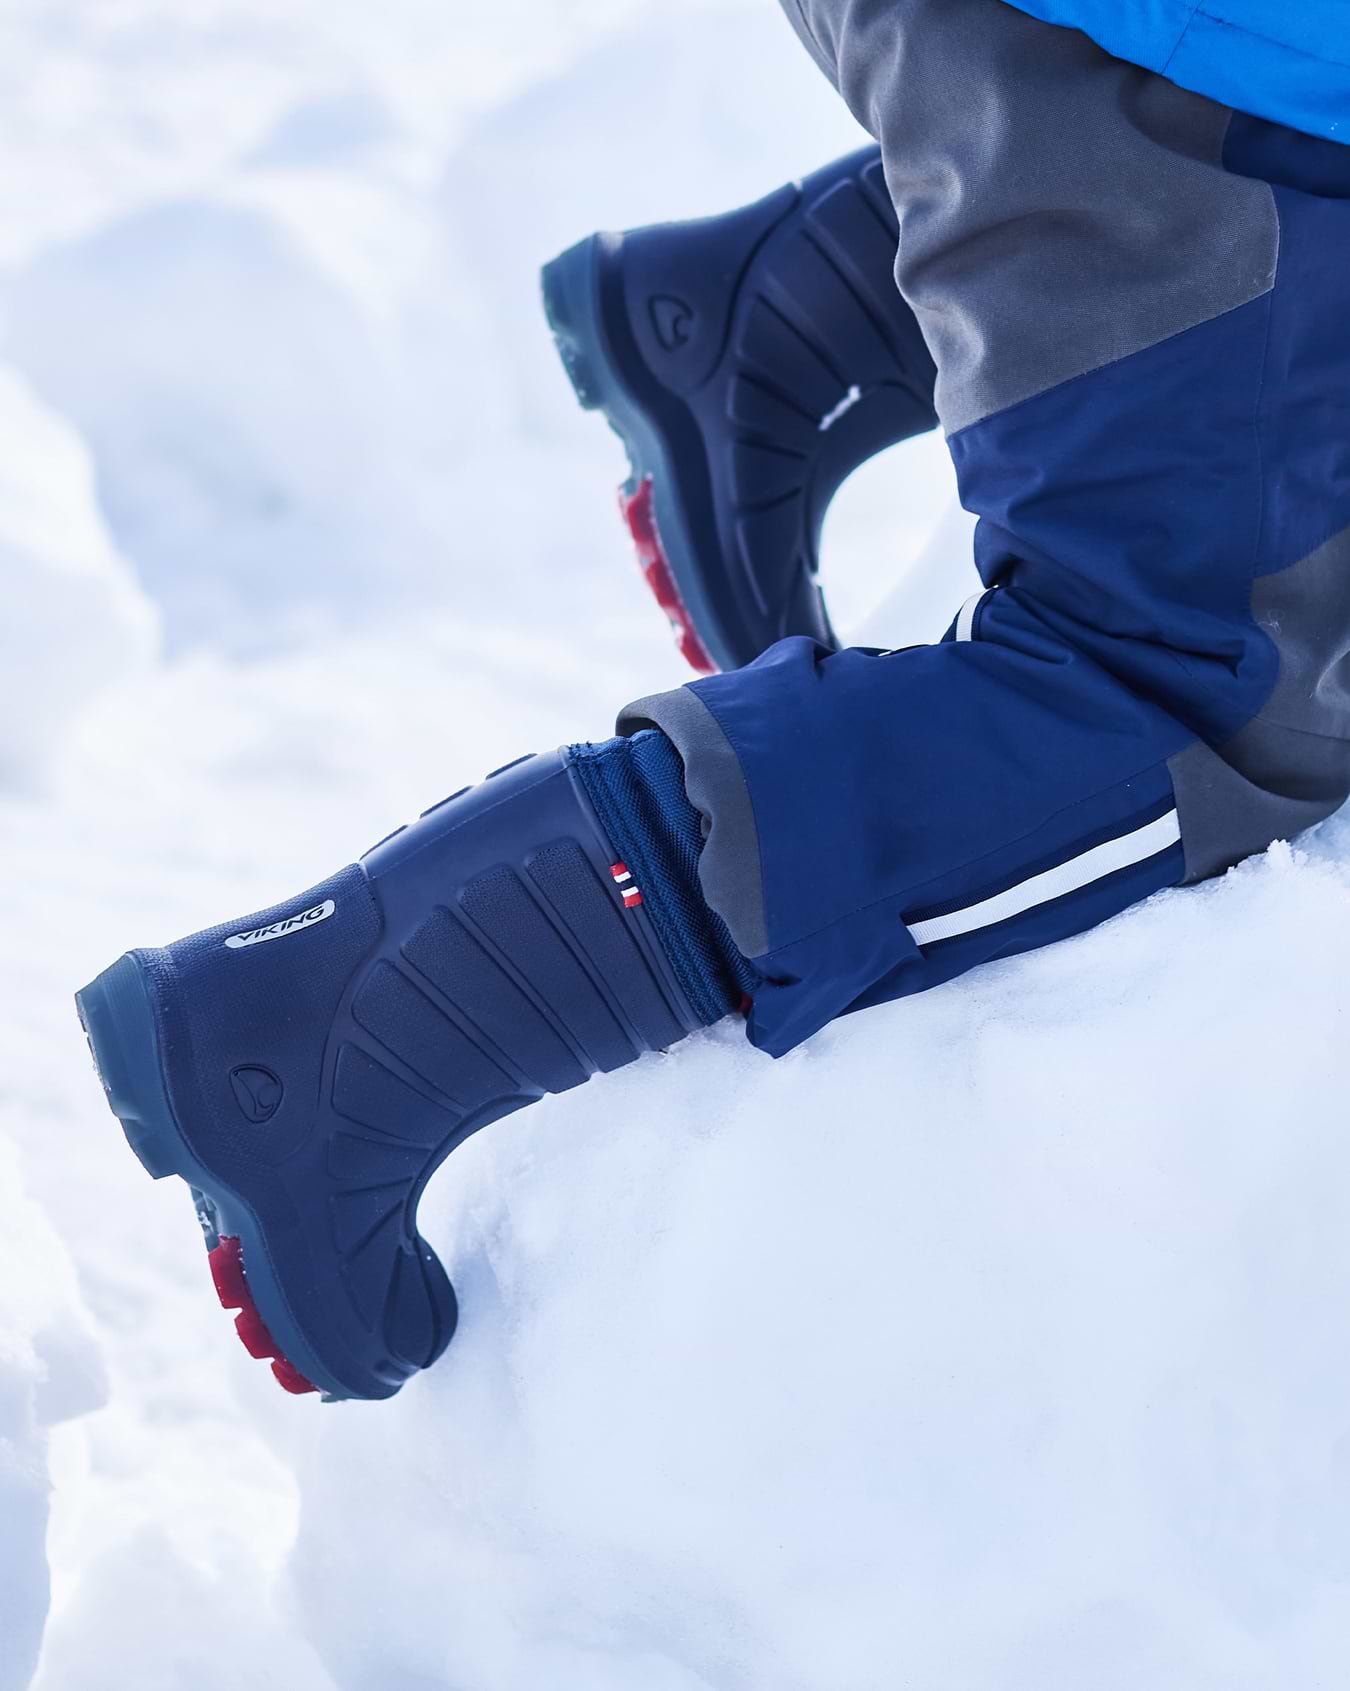 Extreme Warm Navy/Dark Red Thermo Boot